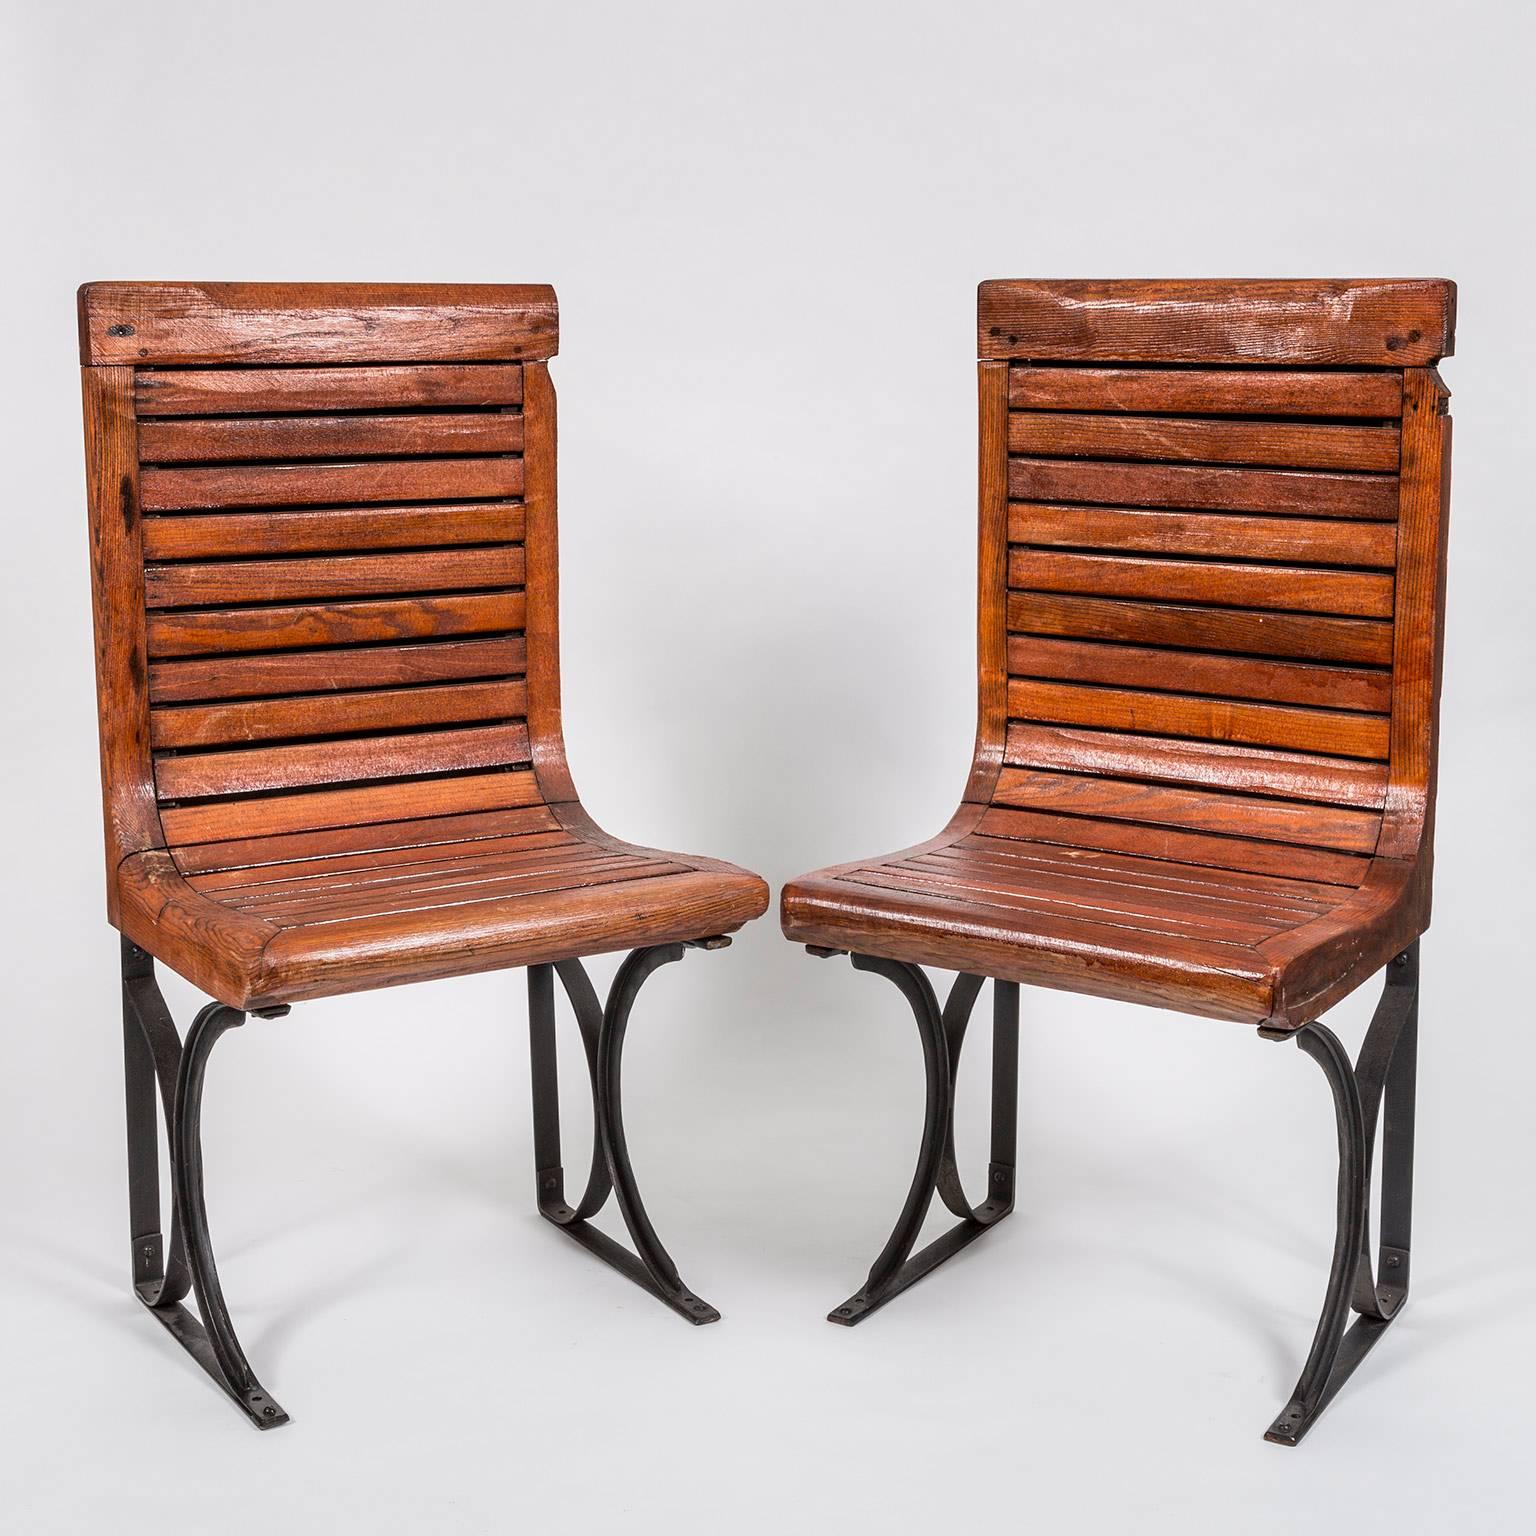 furniture from the 1920s